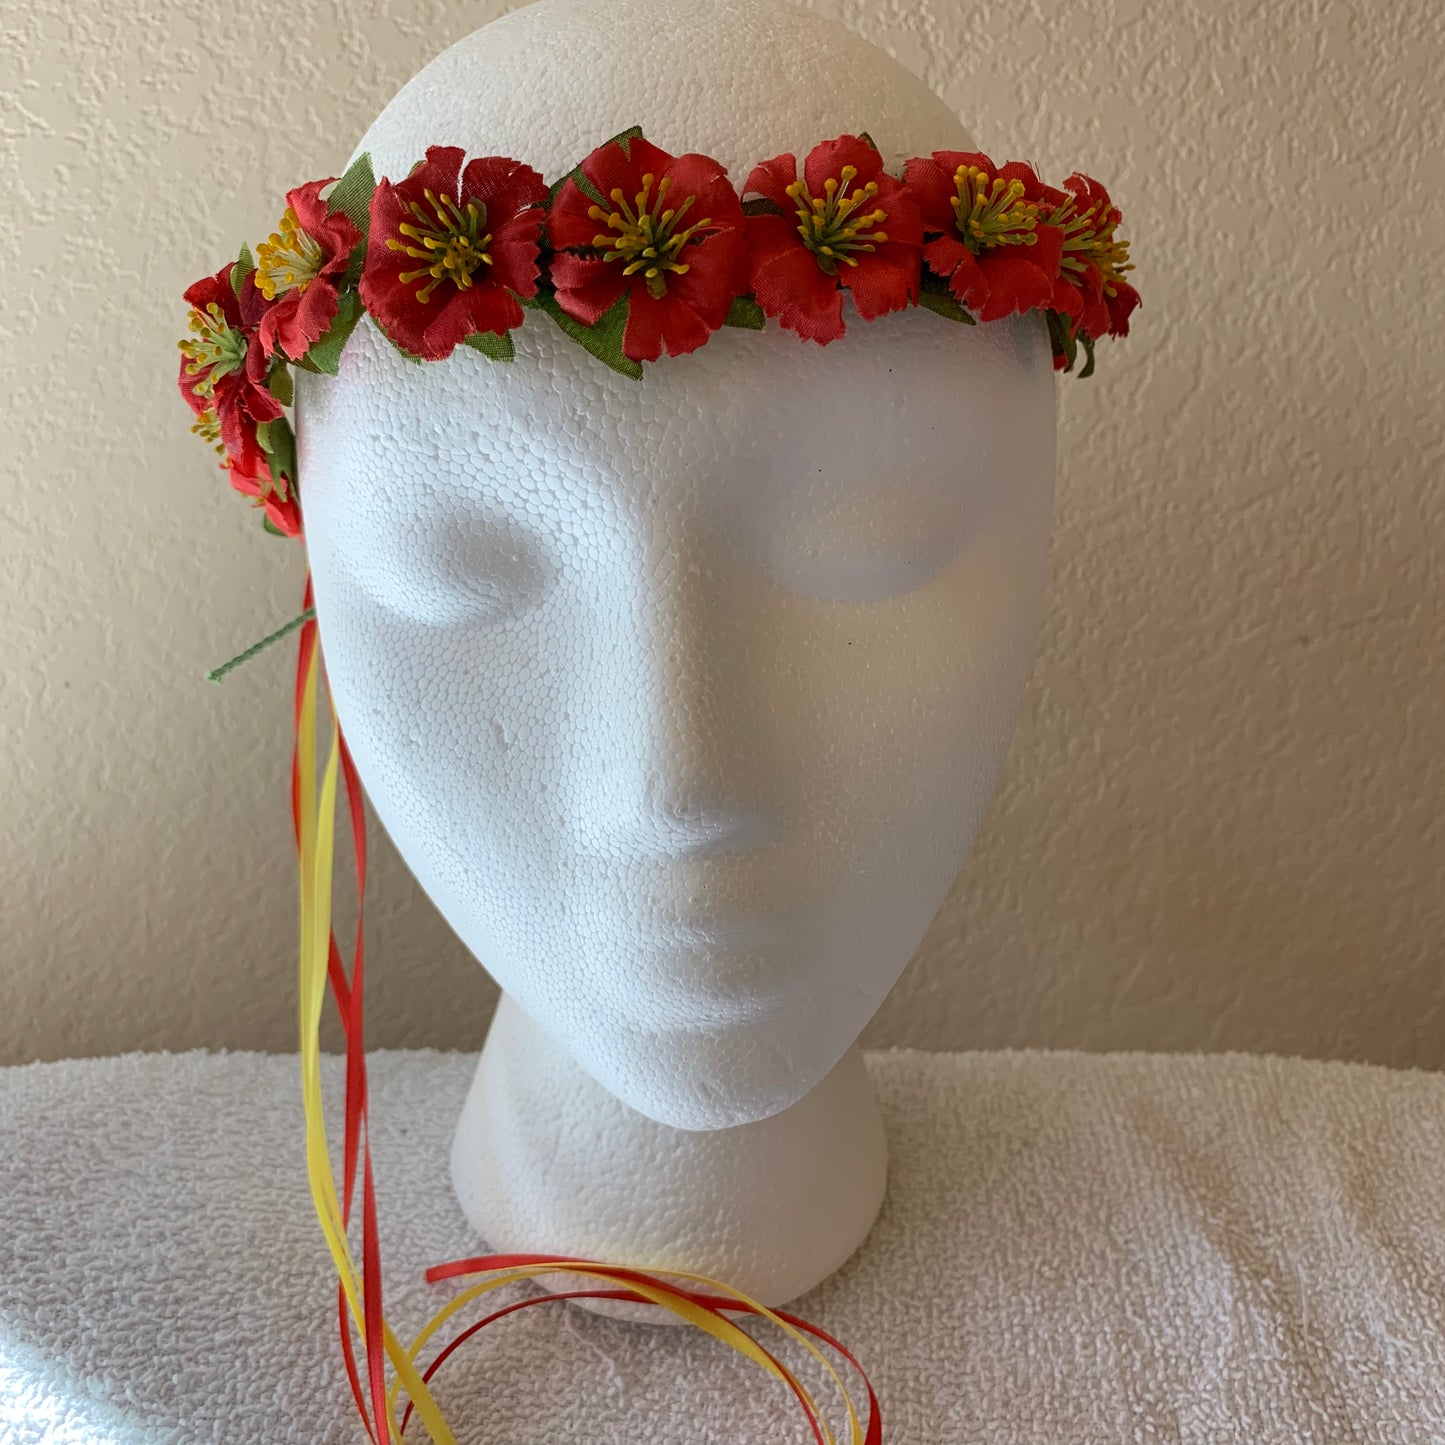 Extra Small Wreath - All red flowers +